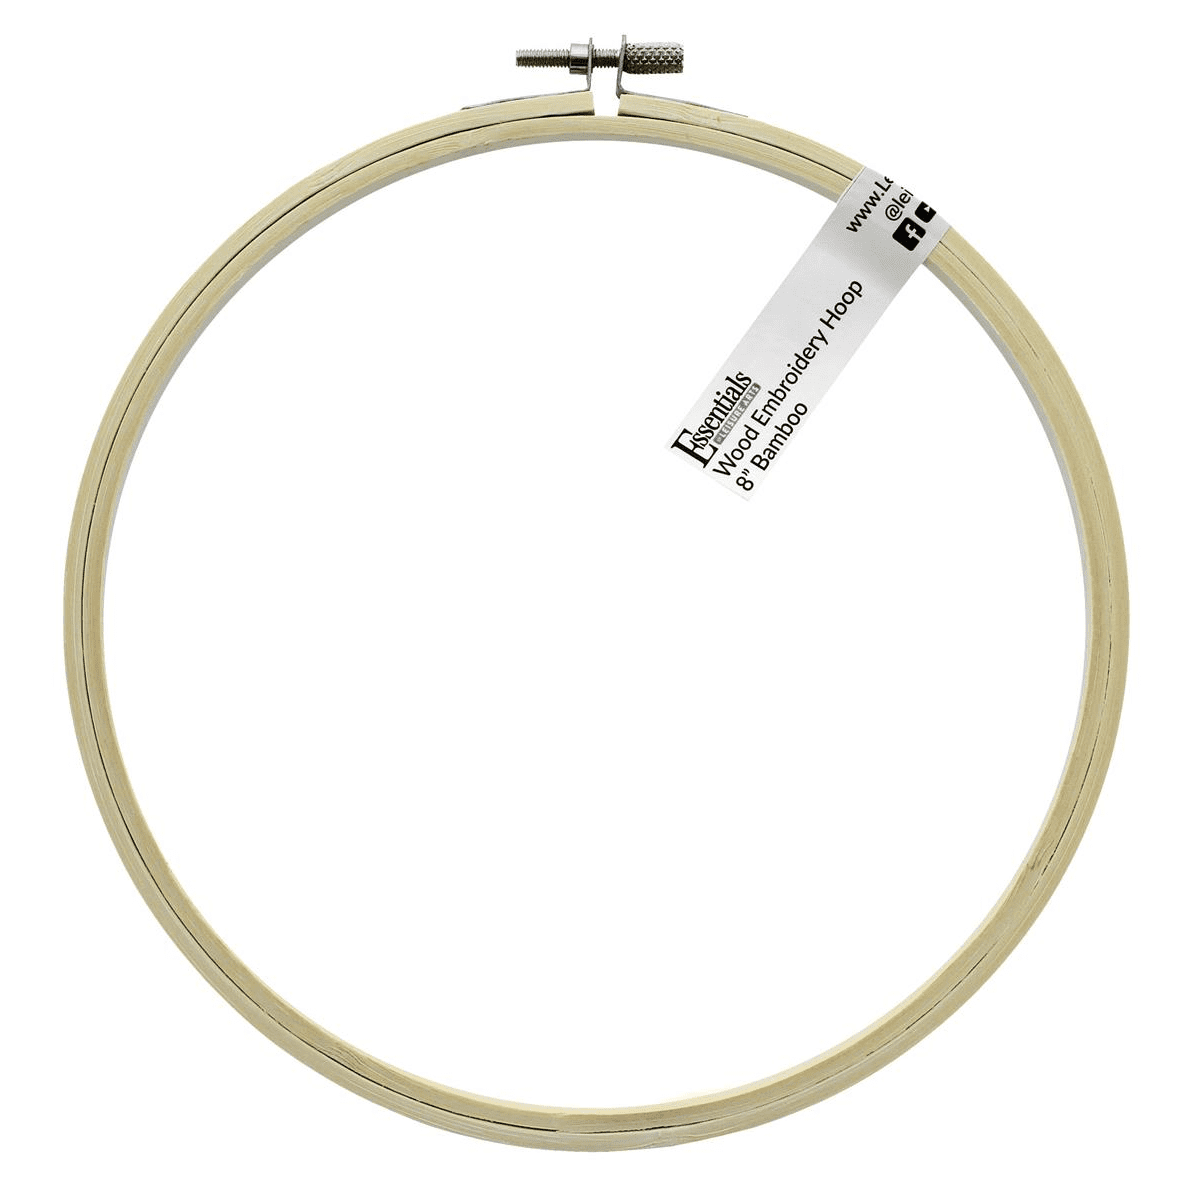 Essentials by Leisure Arts Wood Embroidery Hoop 8 Bamboo - wooden